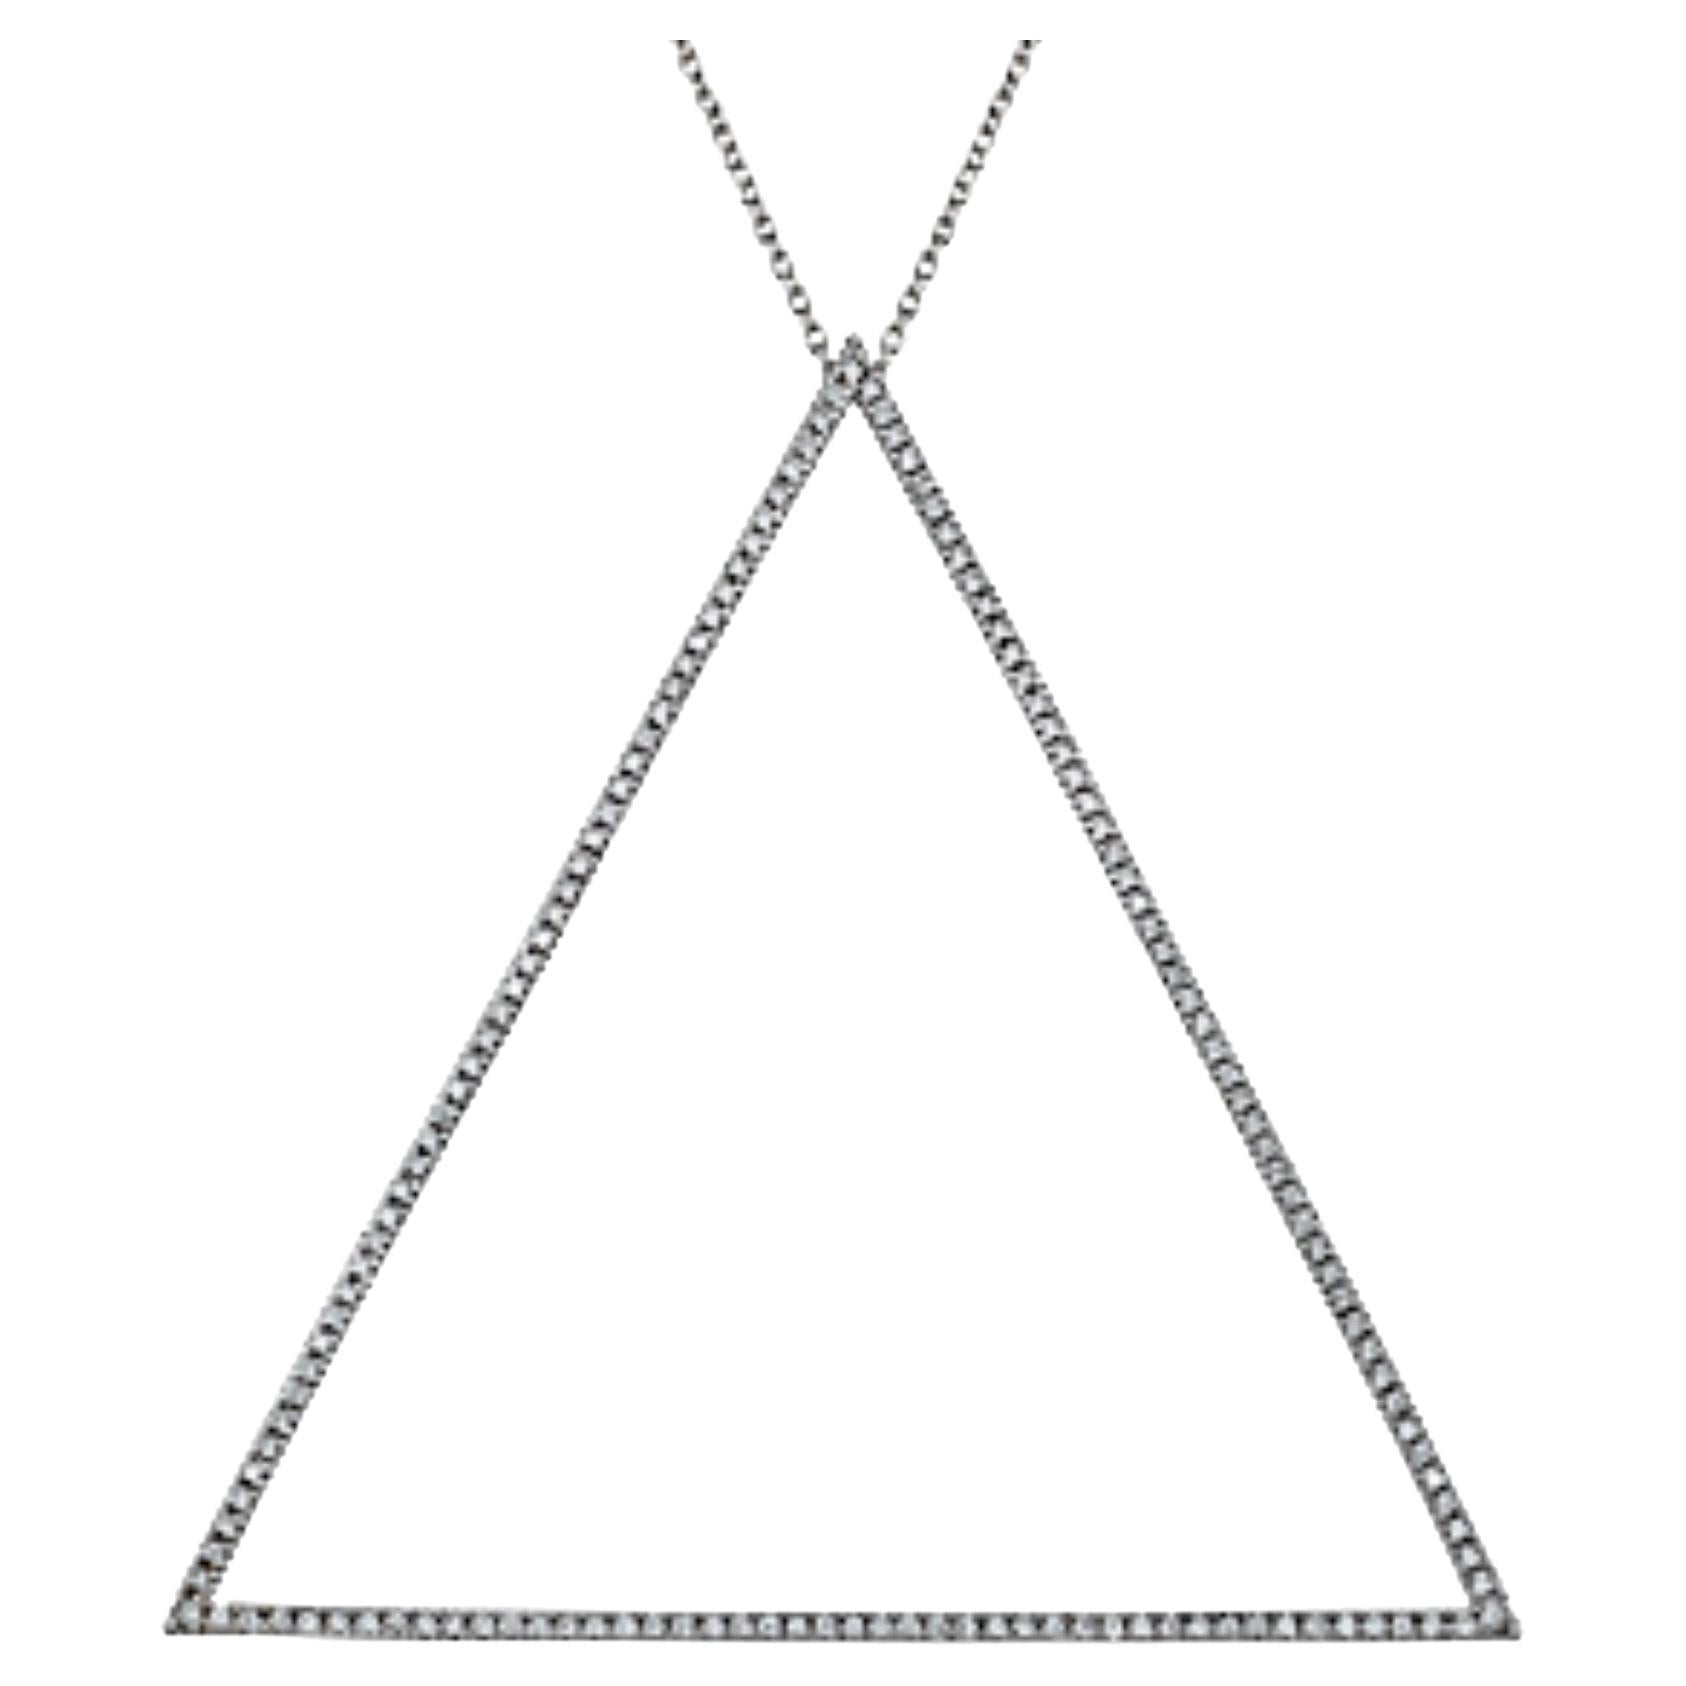 0.67ct "Big Love" Round Diamond Large Triangle Pendant in 18KT White Gold